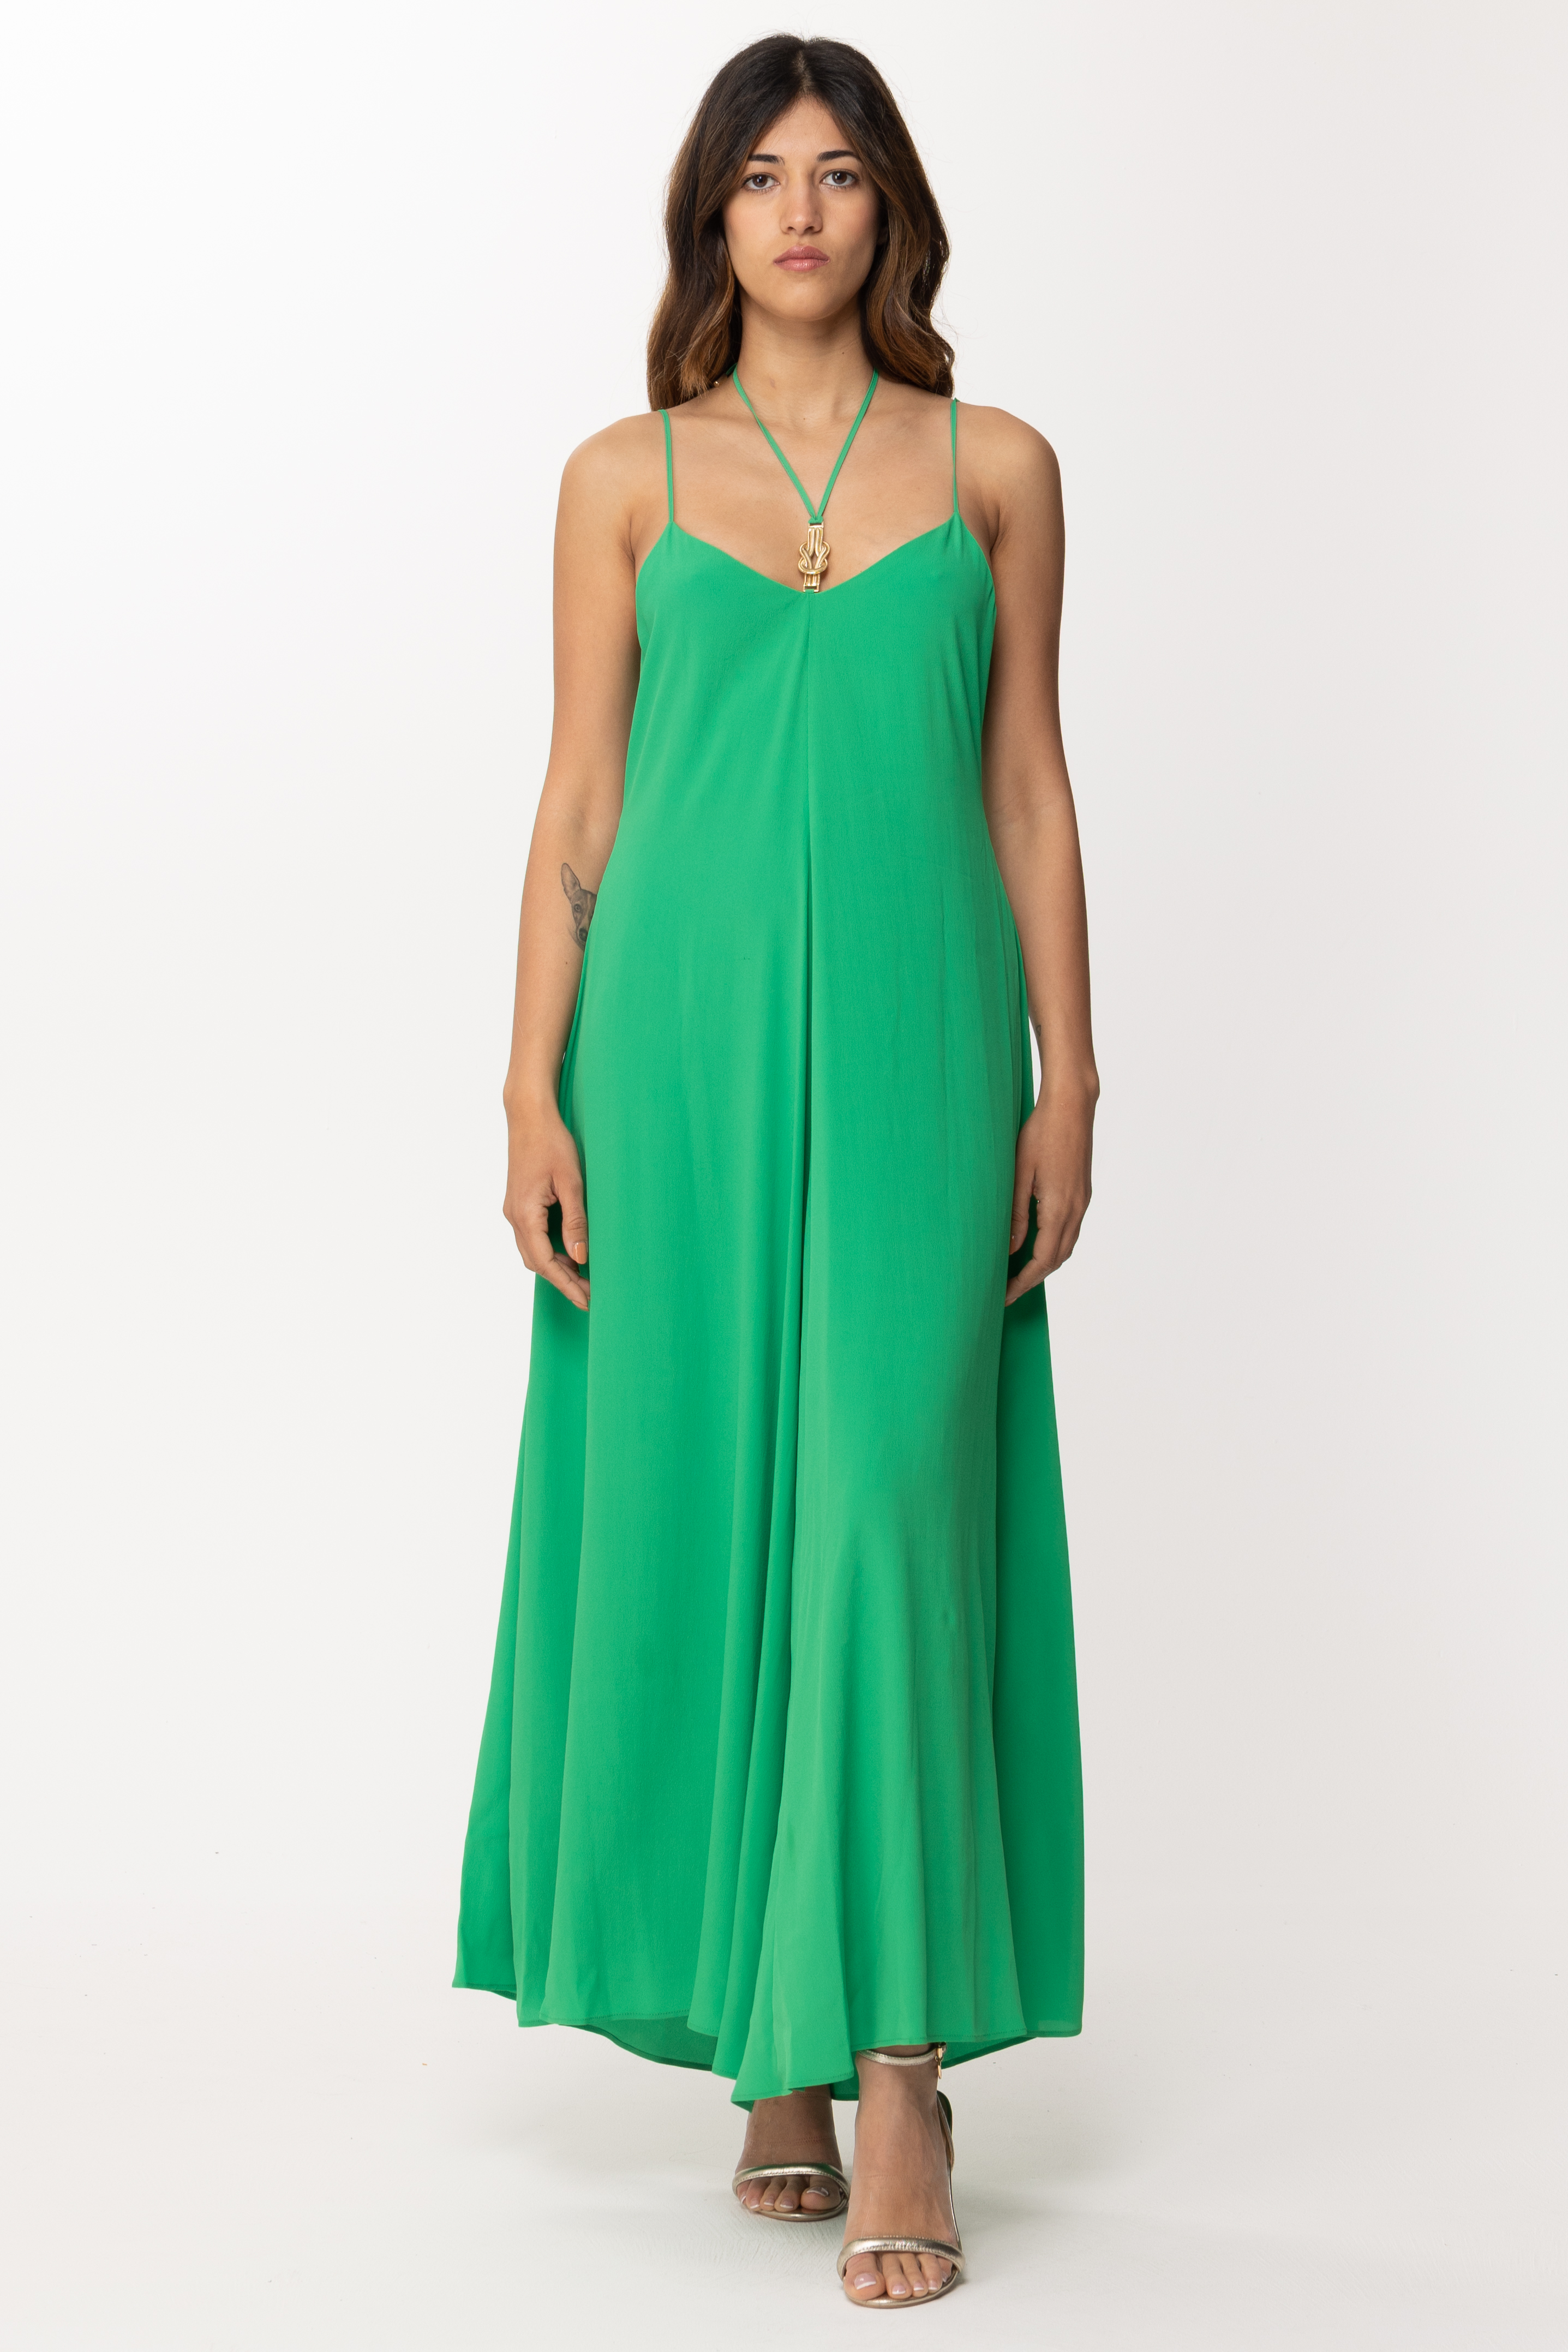 Preview: Simona Corsellini Long dress with gold knot accessory BRIGHT GREEN